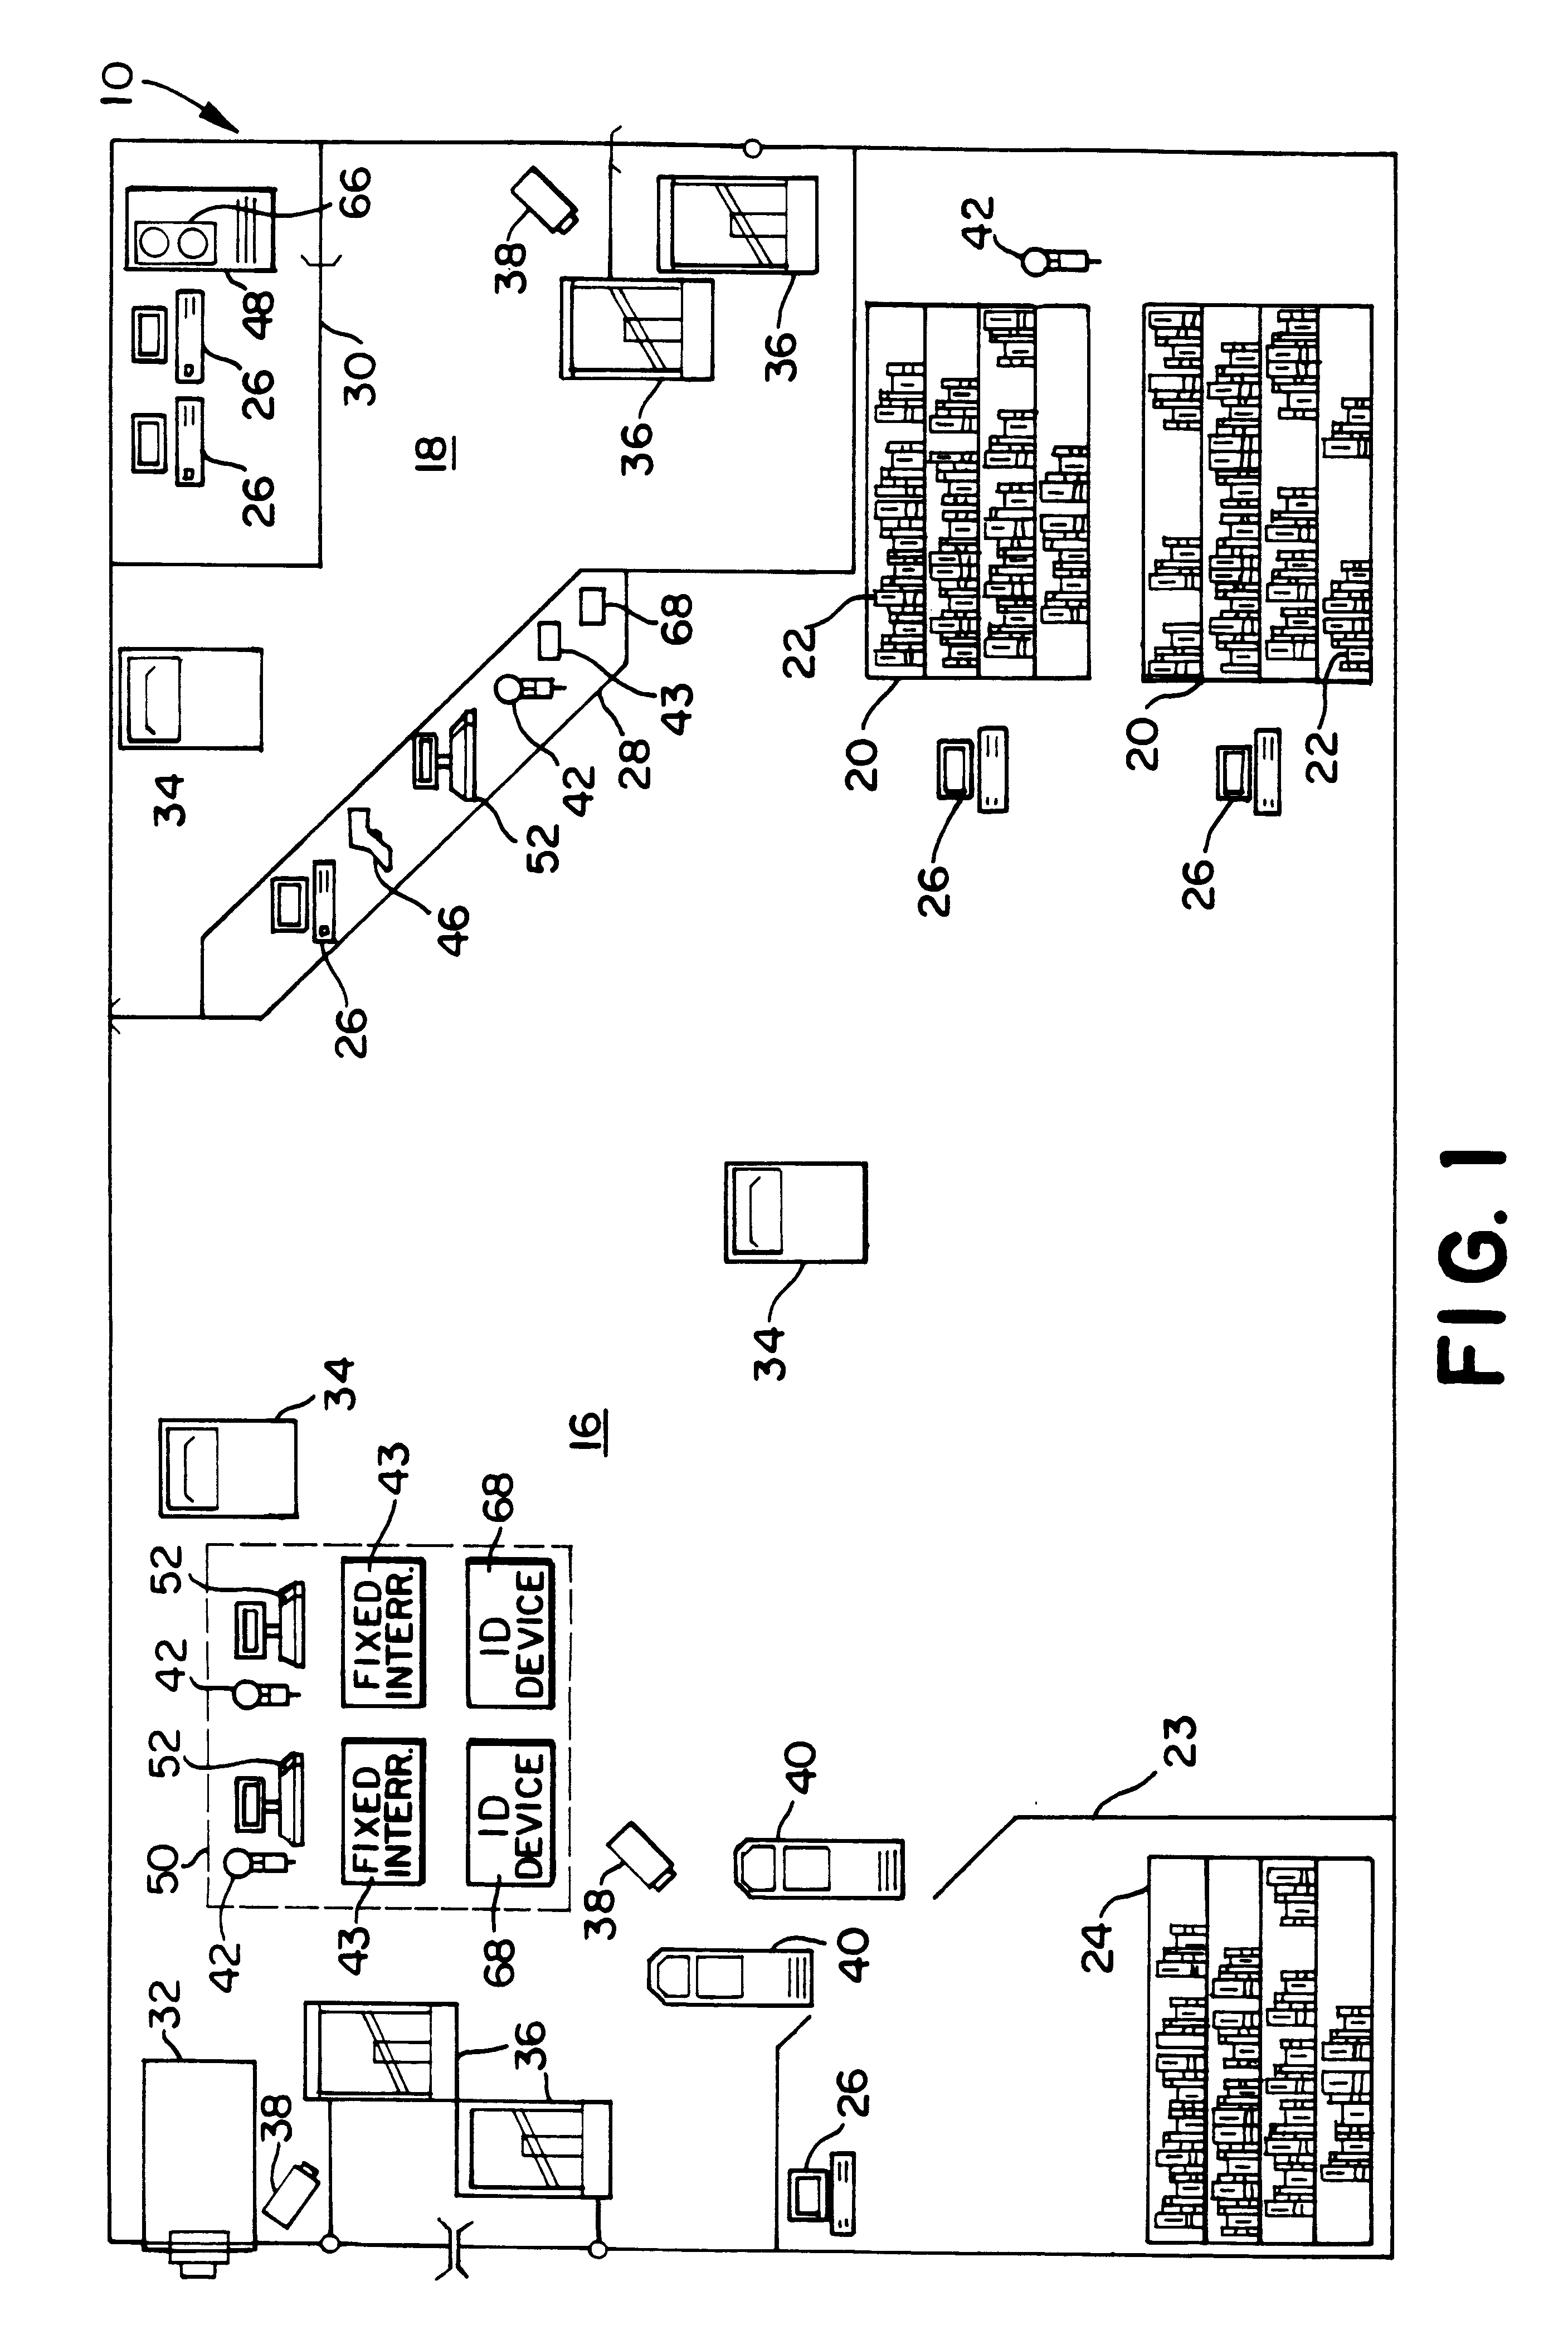 Inventory system using articles with RFID tags